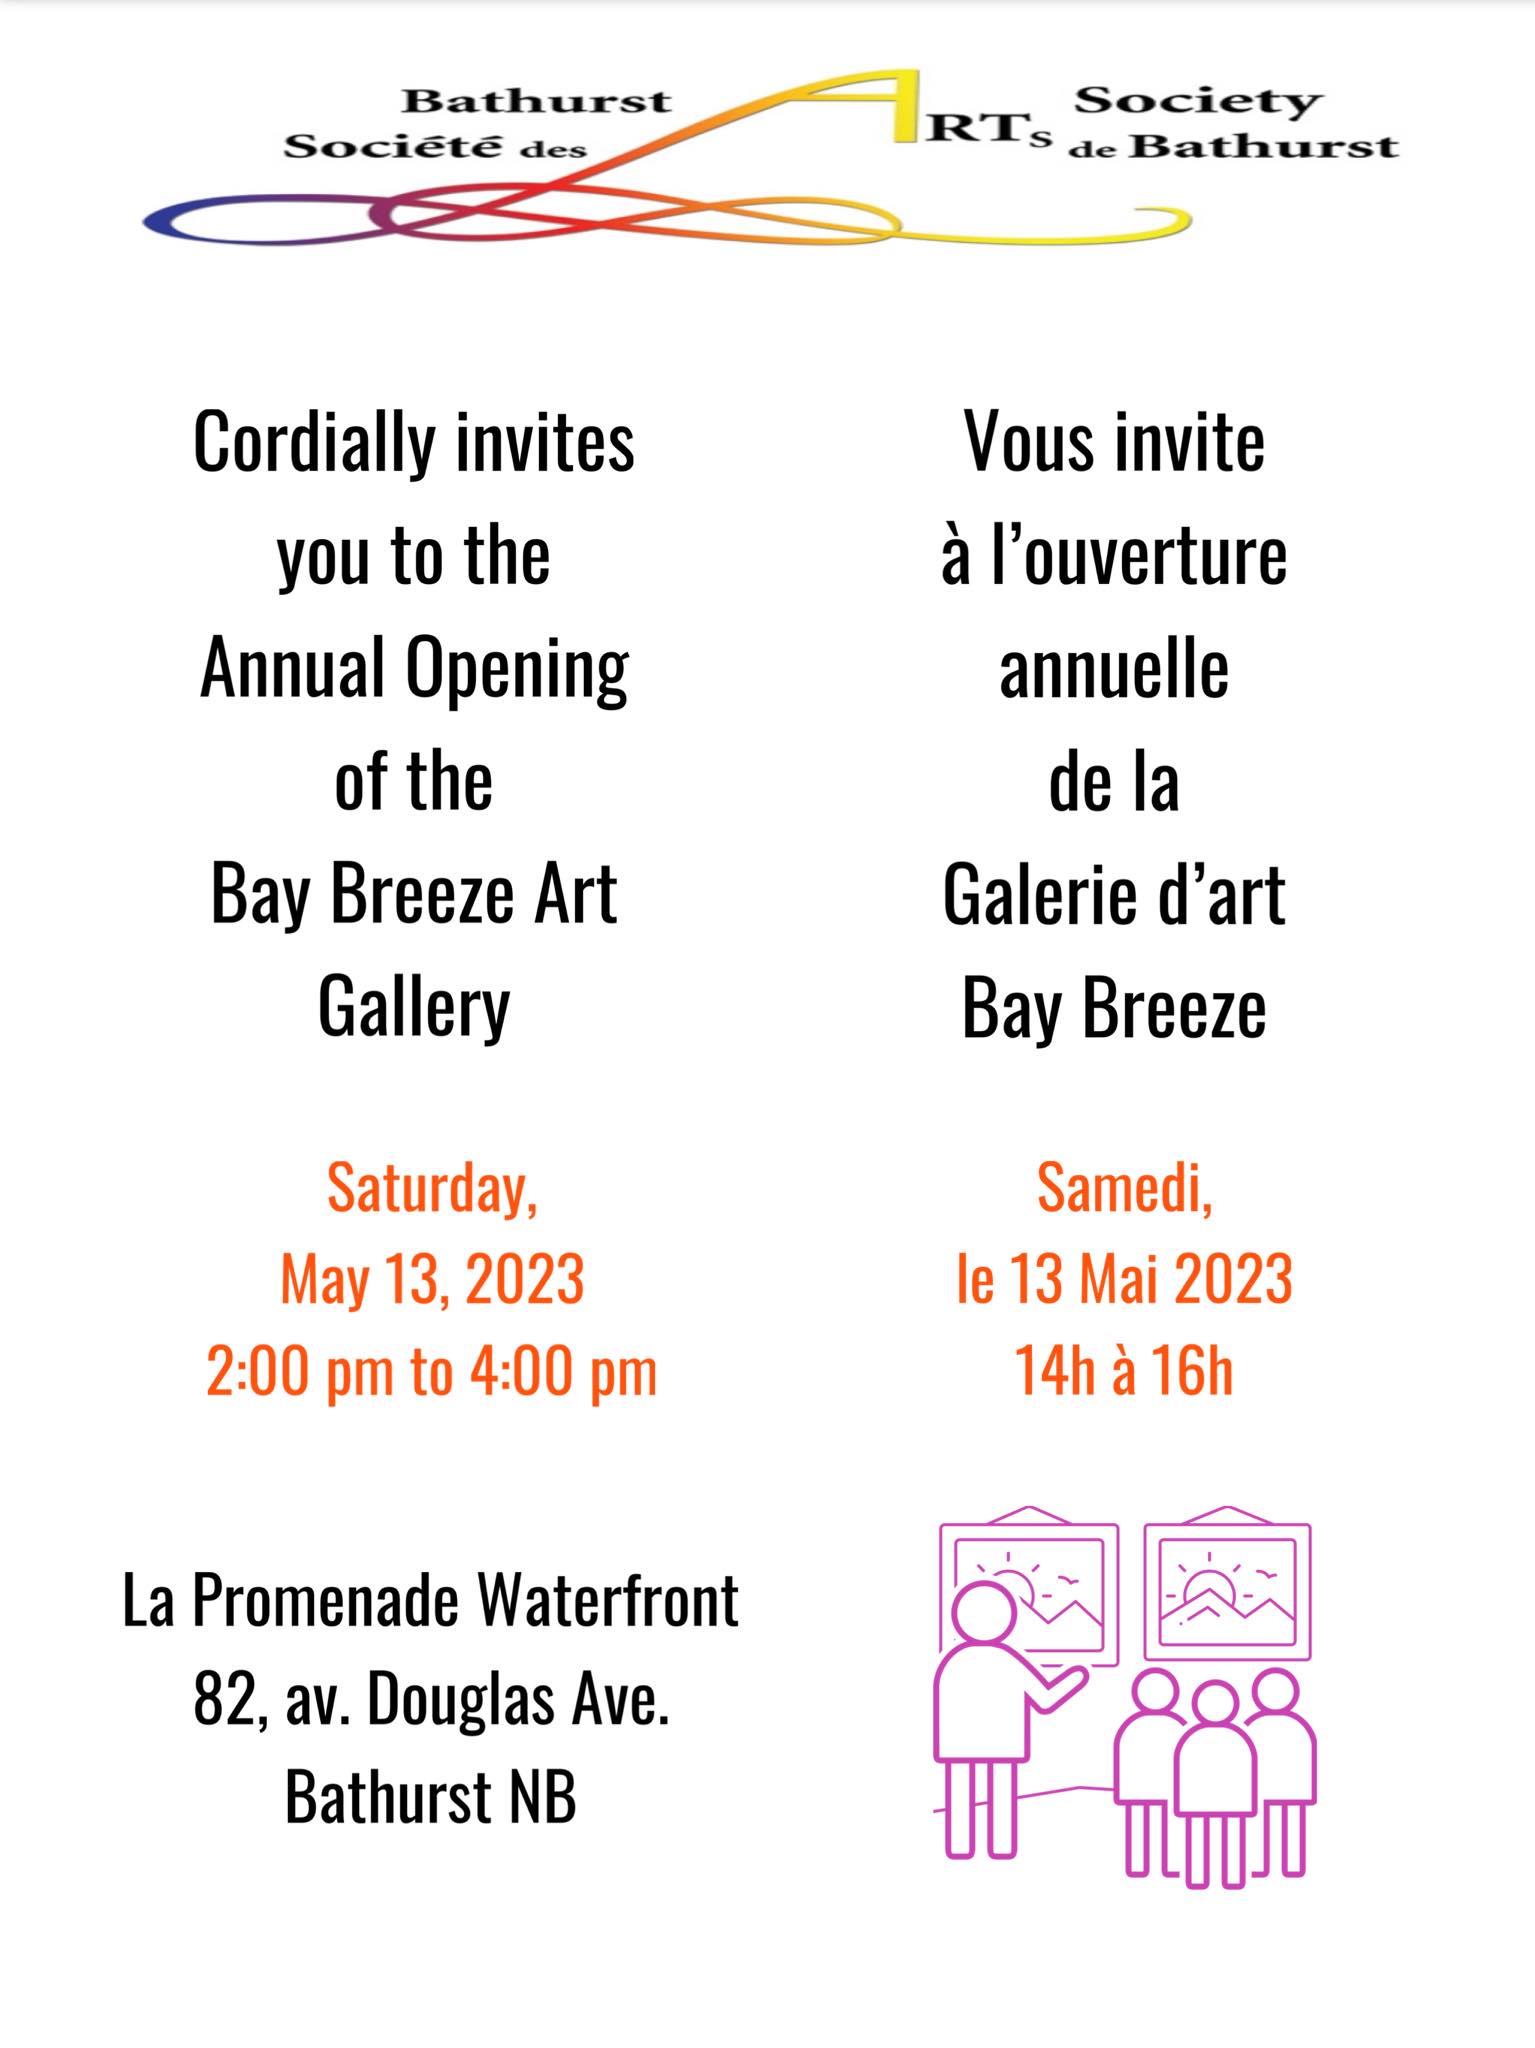 Bathurst Art Society cordially invites you to the annual opening of the Bay Breeze Art Gallery. Saturday, May 13, 2023. 2pm to 4pm. 82 La Promenade Waterfront Avenue, Bathurst, NB